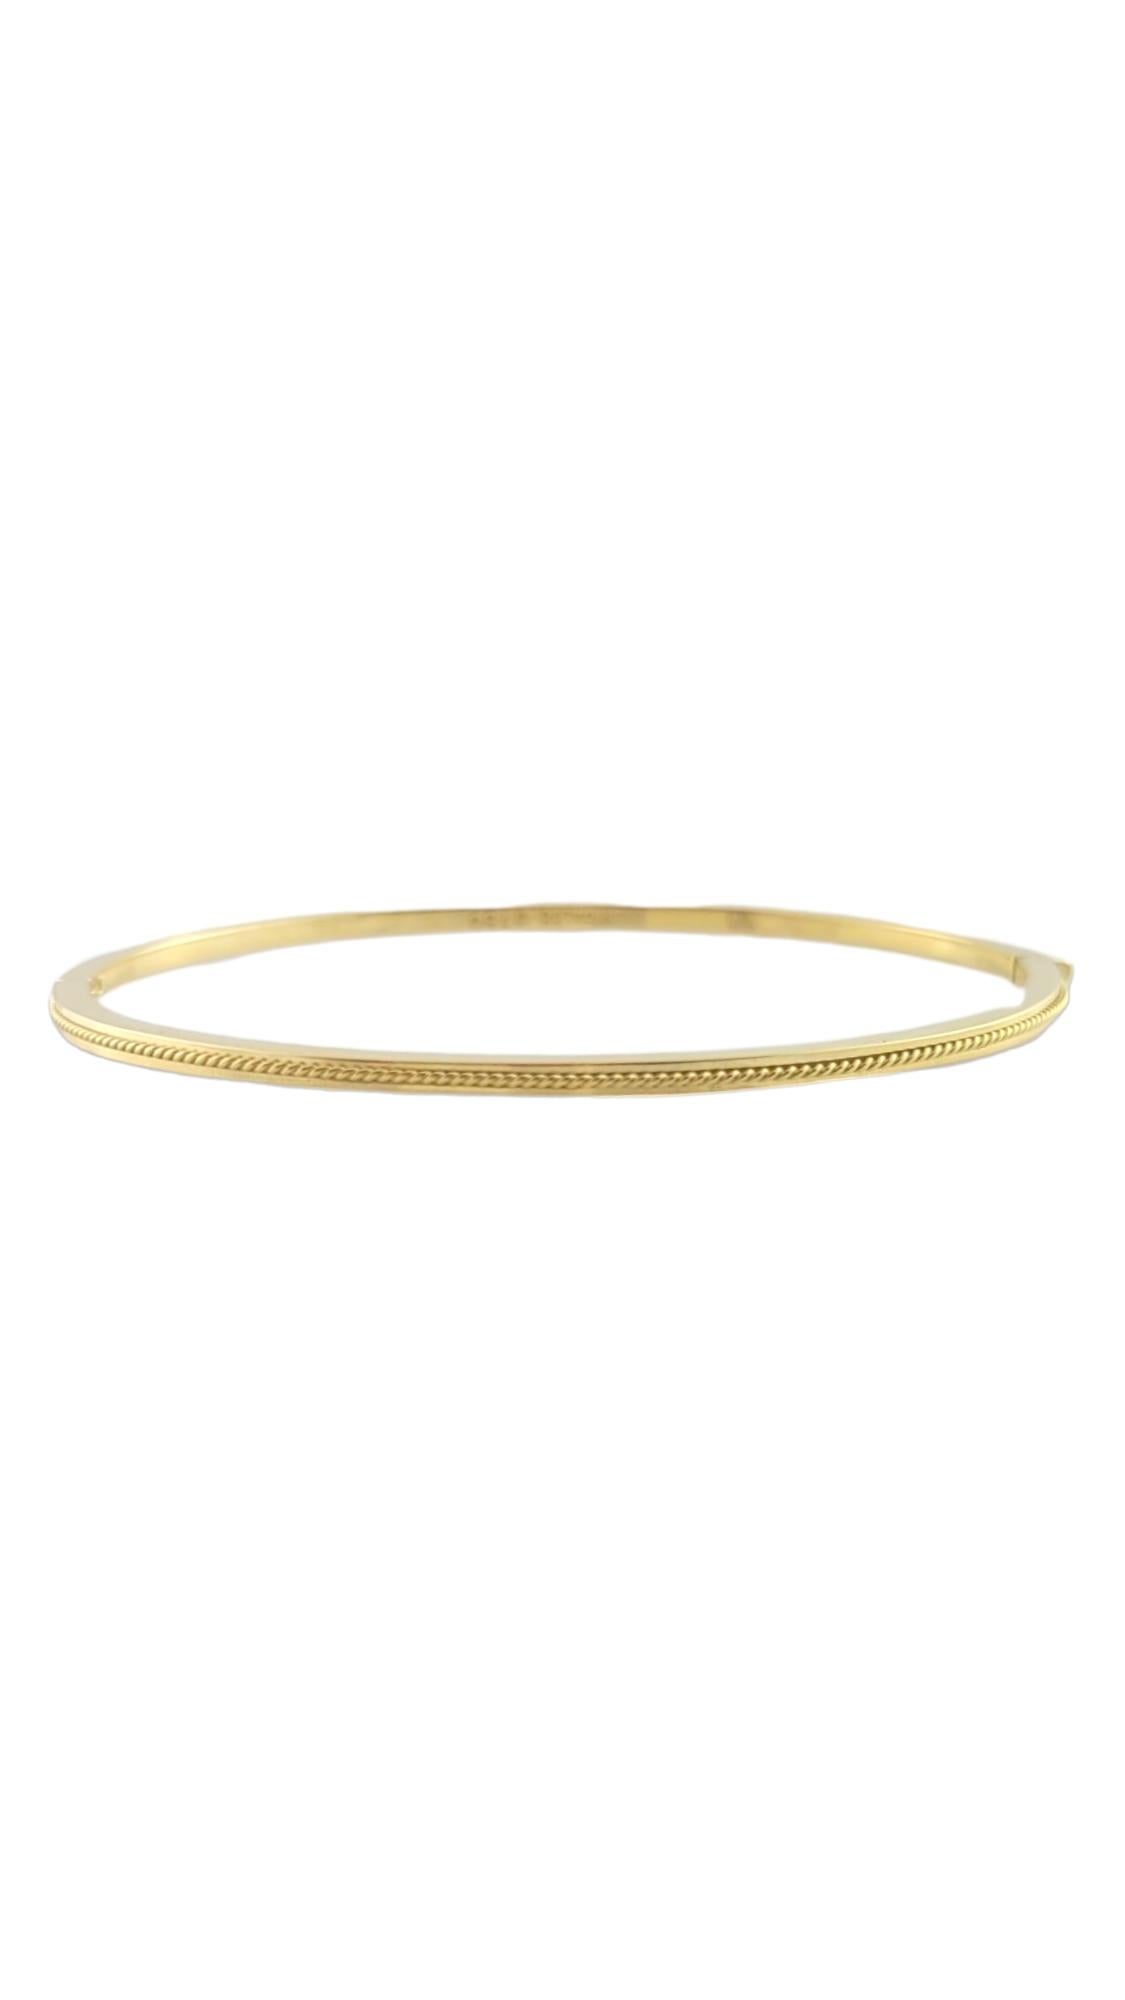 Hidalgo 18K YG Oval Rope Accented Bangle Bracelet

Bangle bracelet in 18 karat yellow gold with rope design accent.

Hallmark: HIDALGO 750

Weight: 10 g/ 6.4 dwt.

Chain Length: 6.5 in.

1.8 mm thick.

Very good condition, professionally